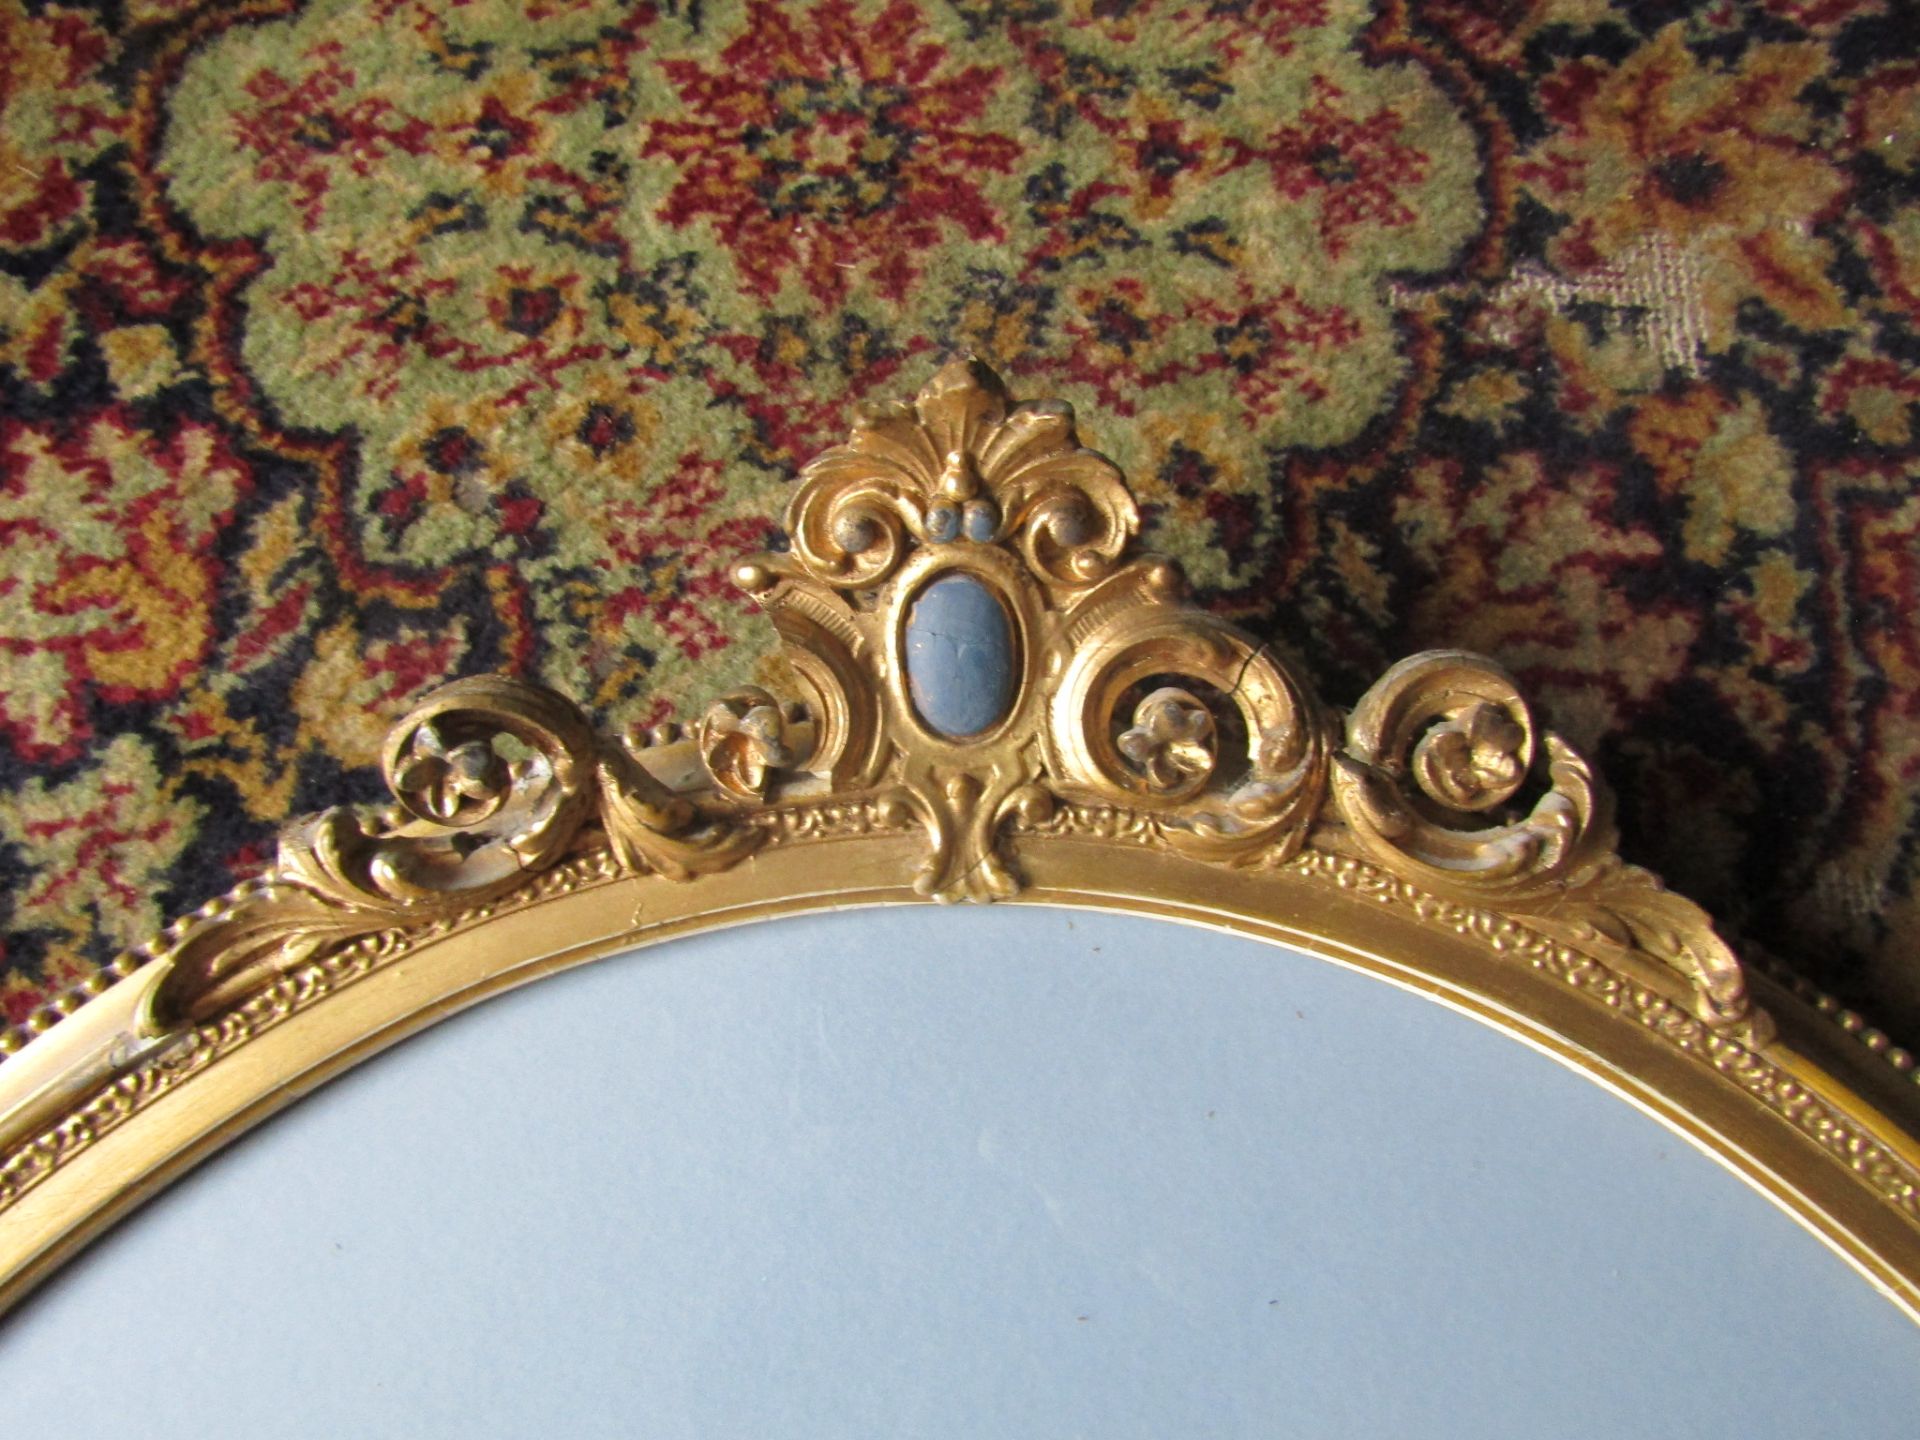 Print in ornate oval gilt frame 60cm x 82cm approx - Image 2 of 2